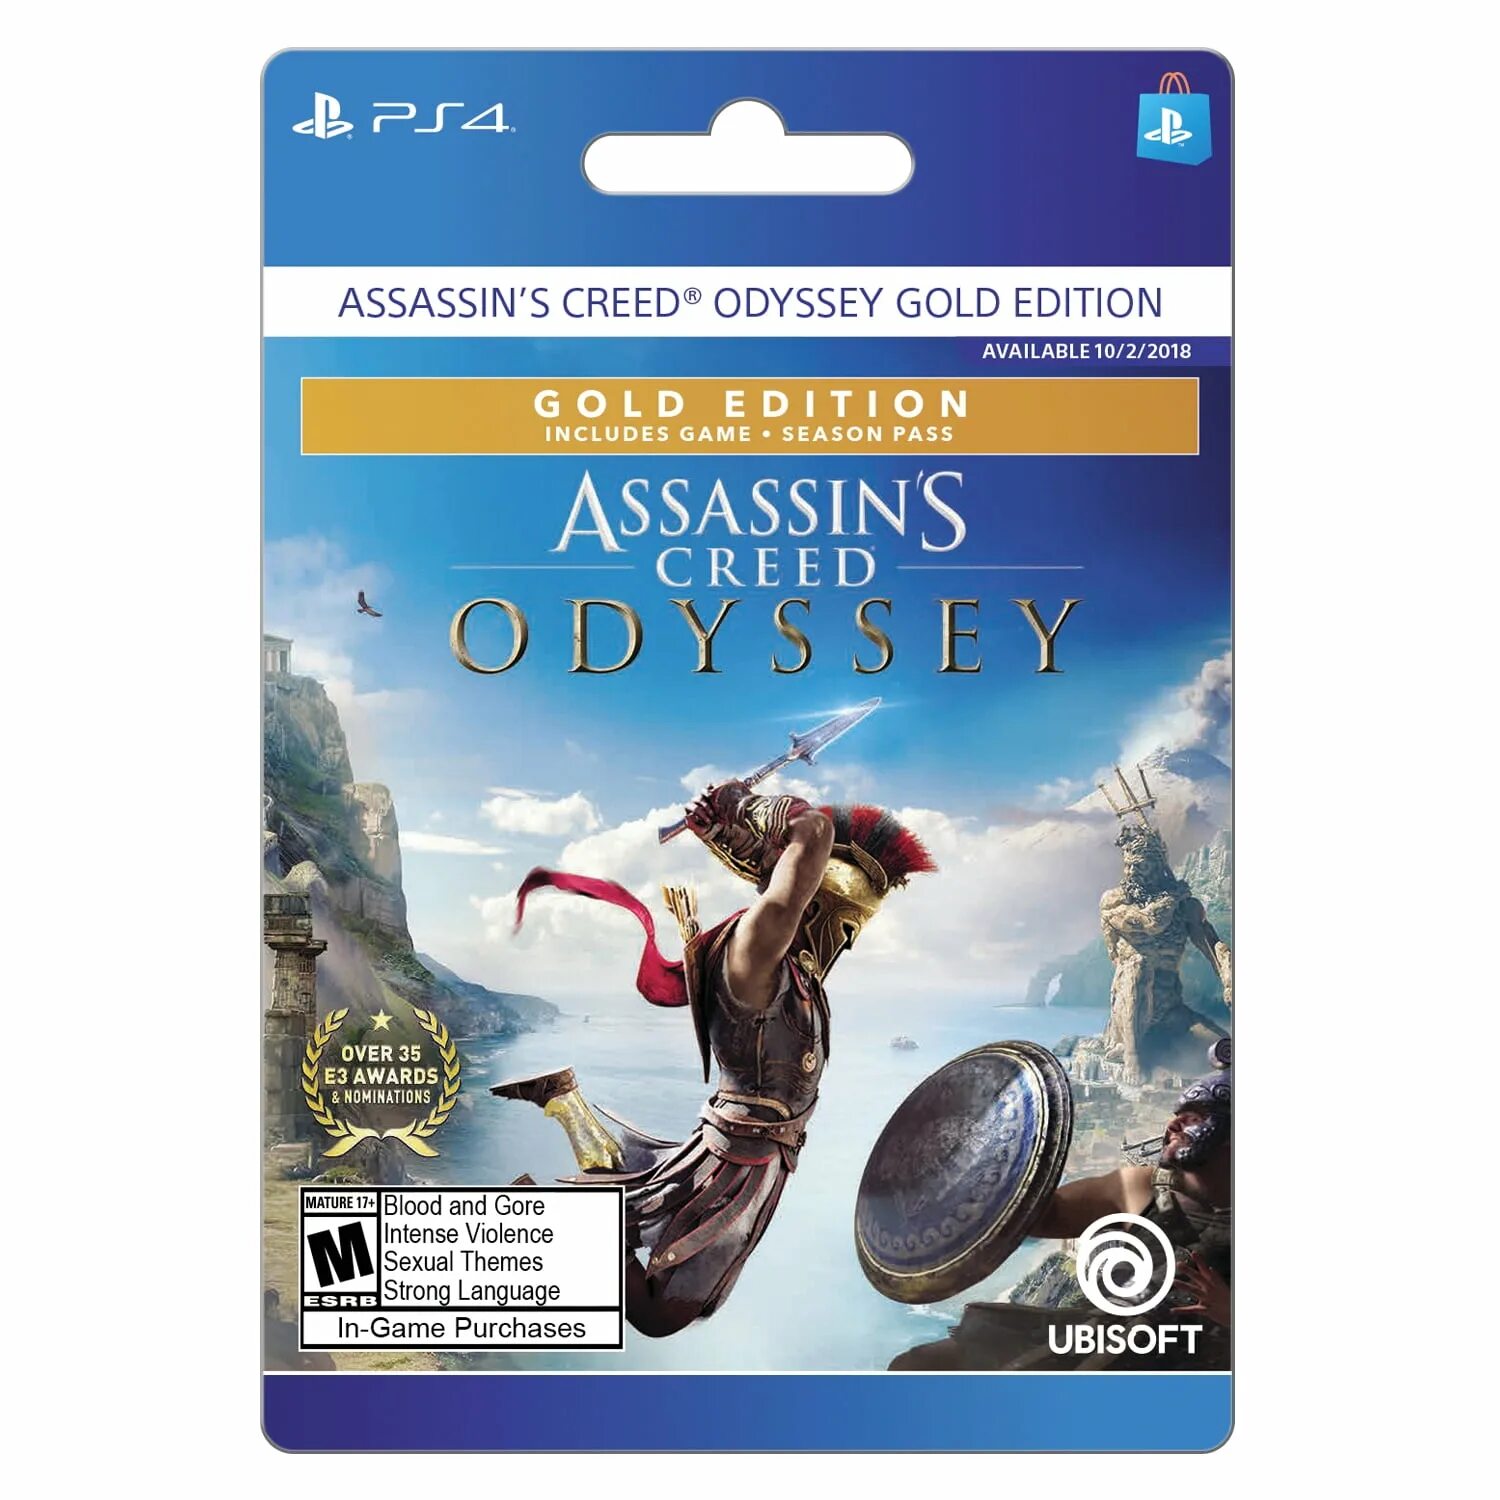 Assassin's Creed Odyssey Gold Edition ps4. Ассасин Крид Одиссея Голд эдишн. Assassin's Creed Odyssey Gold Edition ps4 диск. Ассасин Крид Одиссея пс4. Assassin odyssey ps4